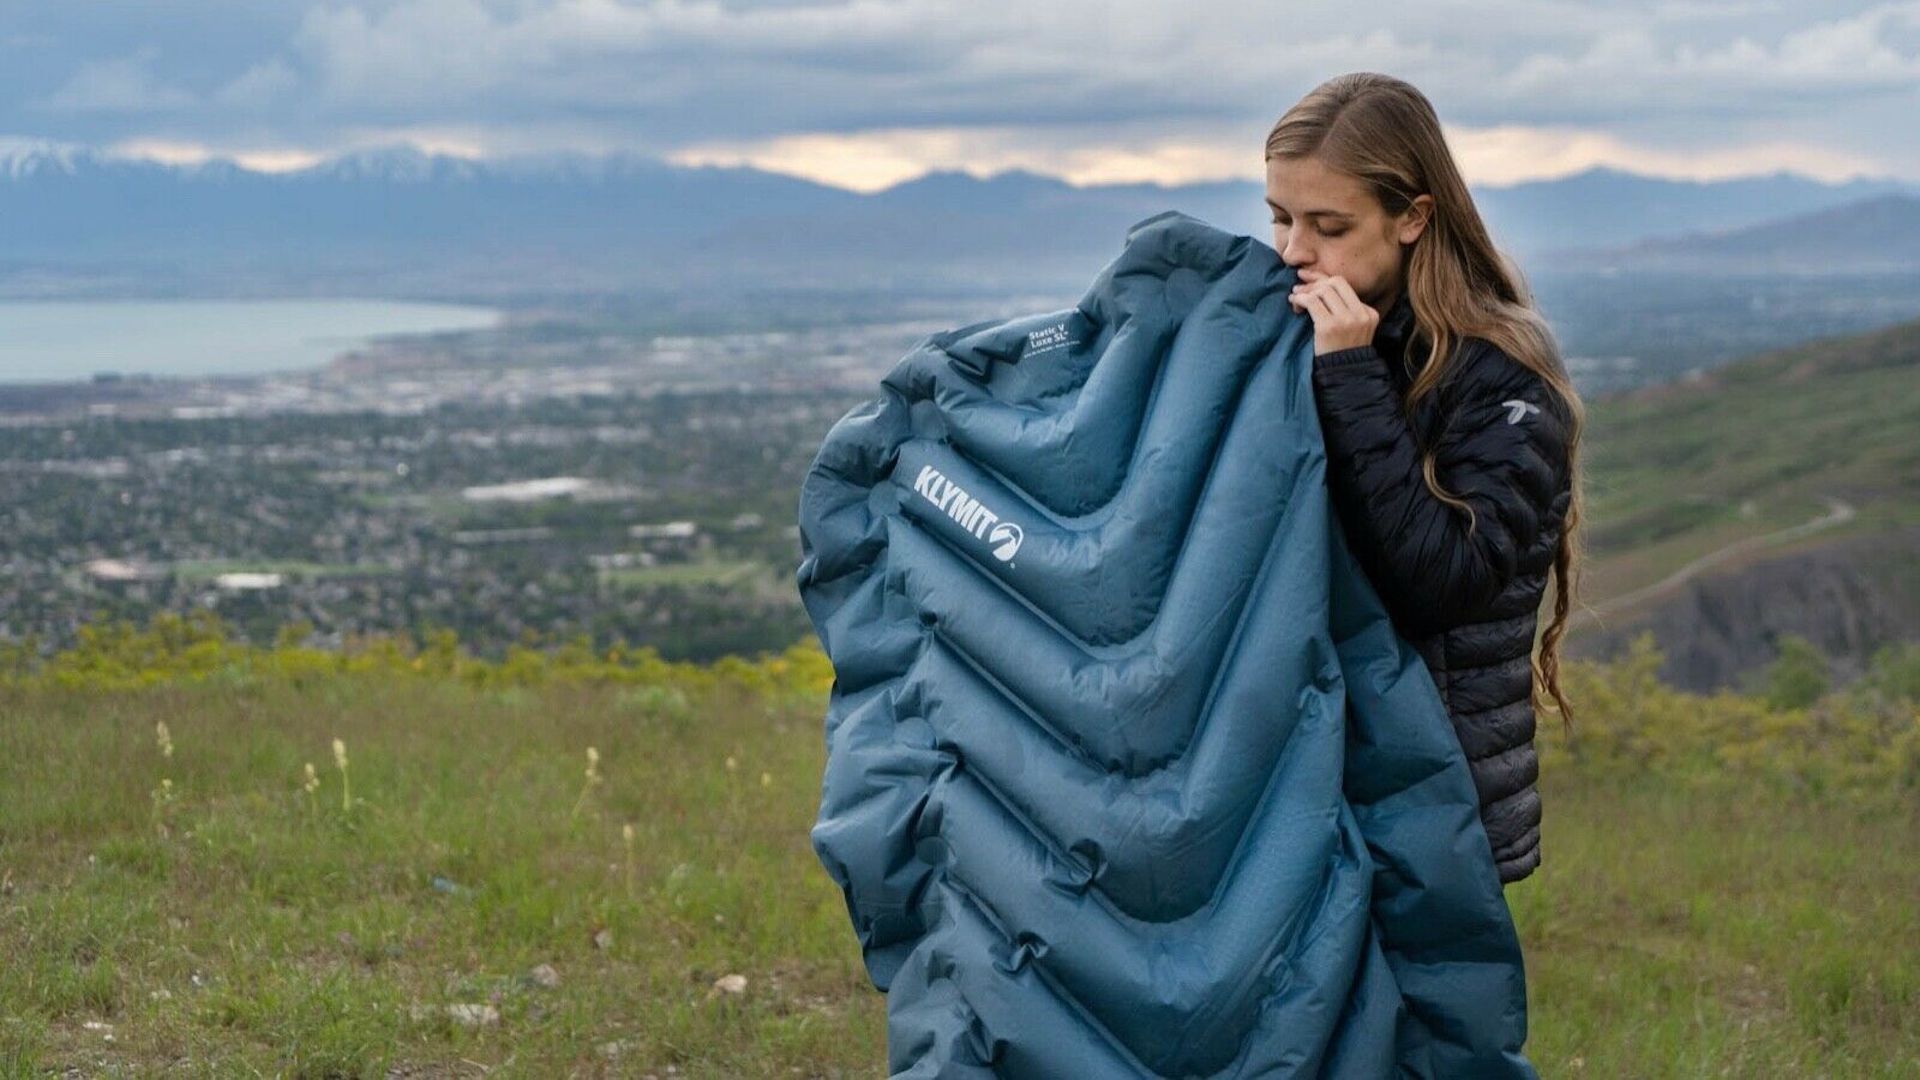 Using Yoga Mat as Sleeping Pad for Camping? Here's What We Think